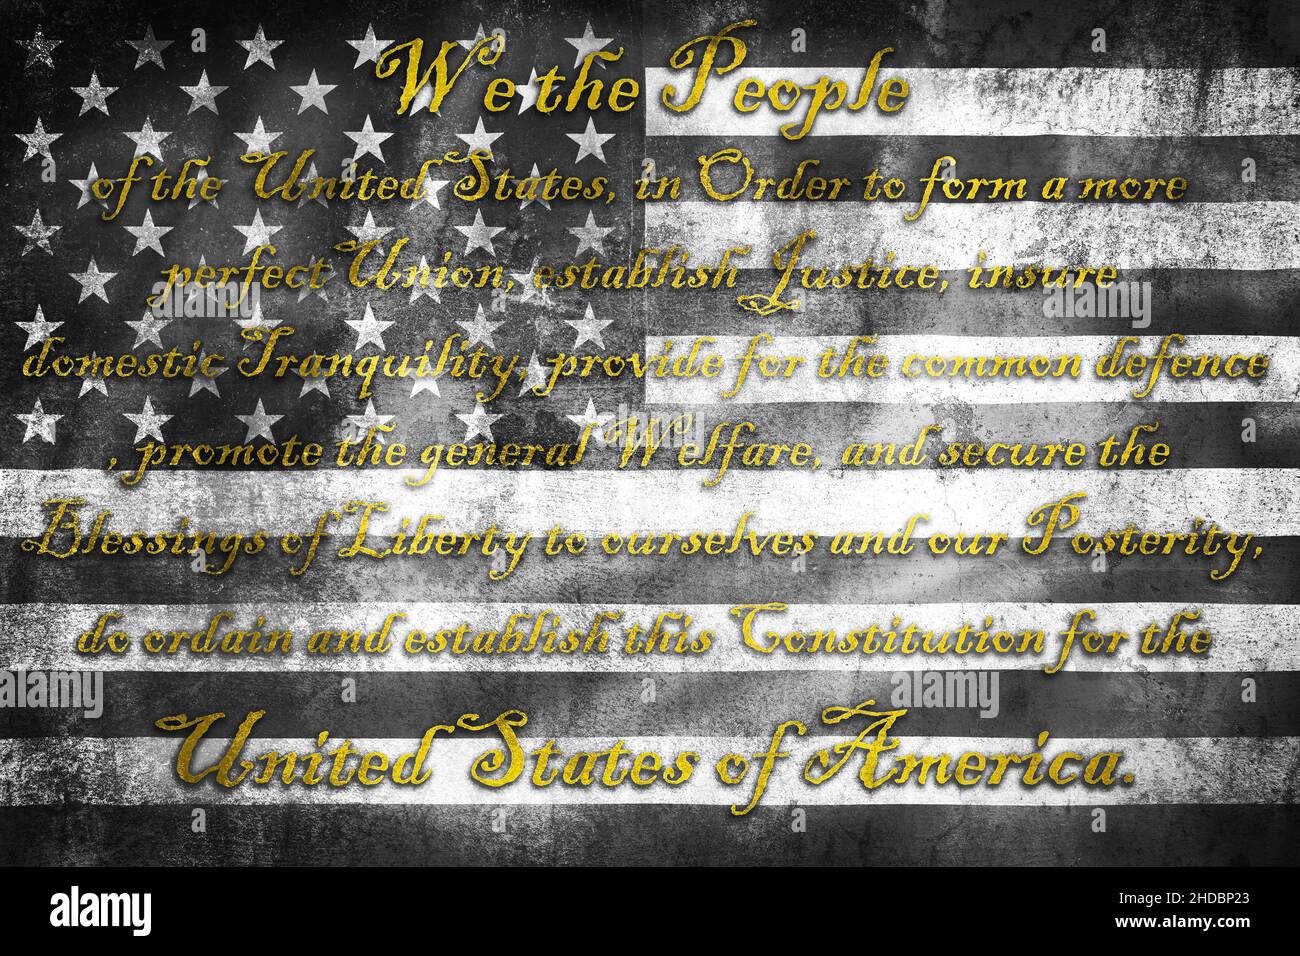 USA Constitution preamble We the People on grunge black and white US flag , United stares of America Stock Photo